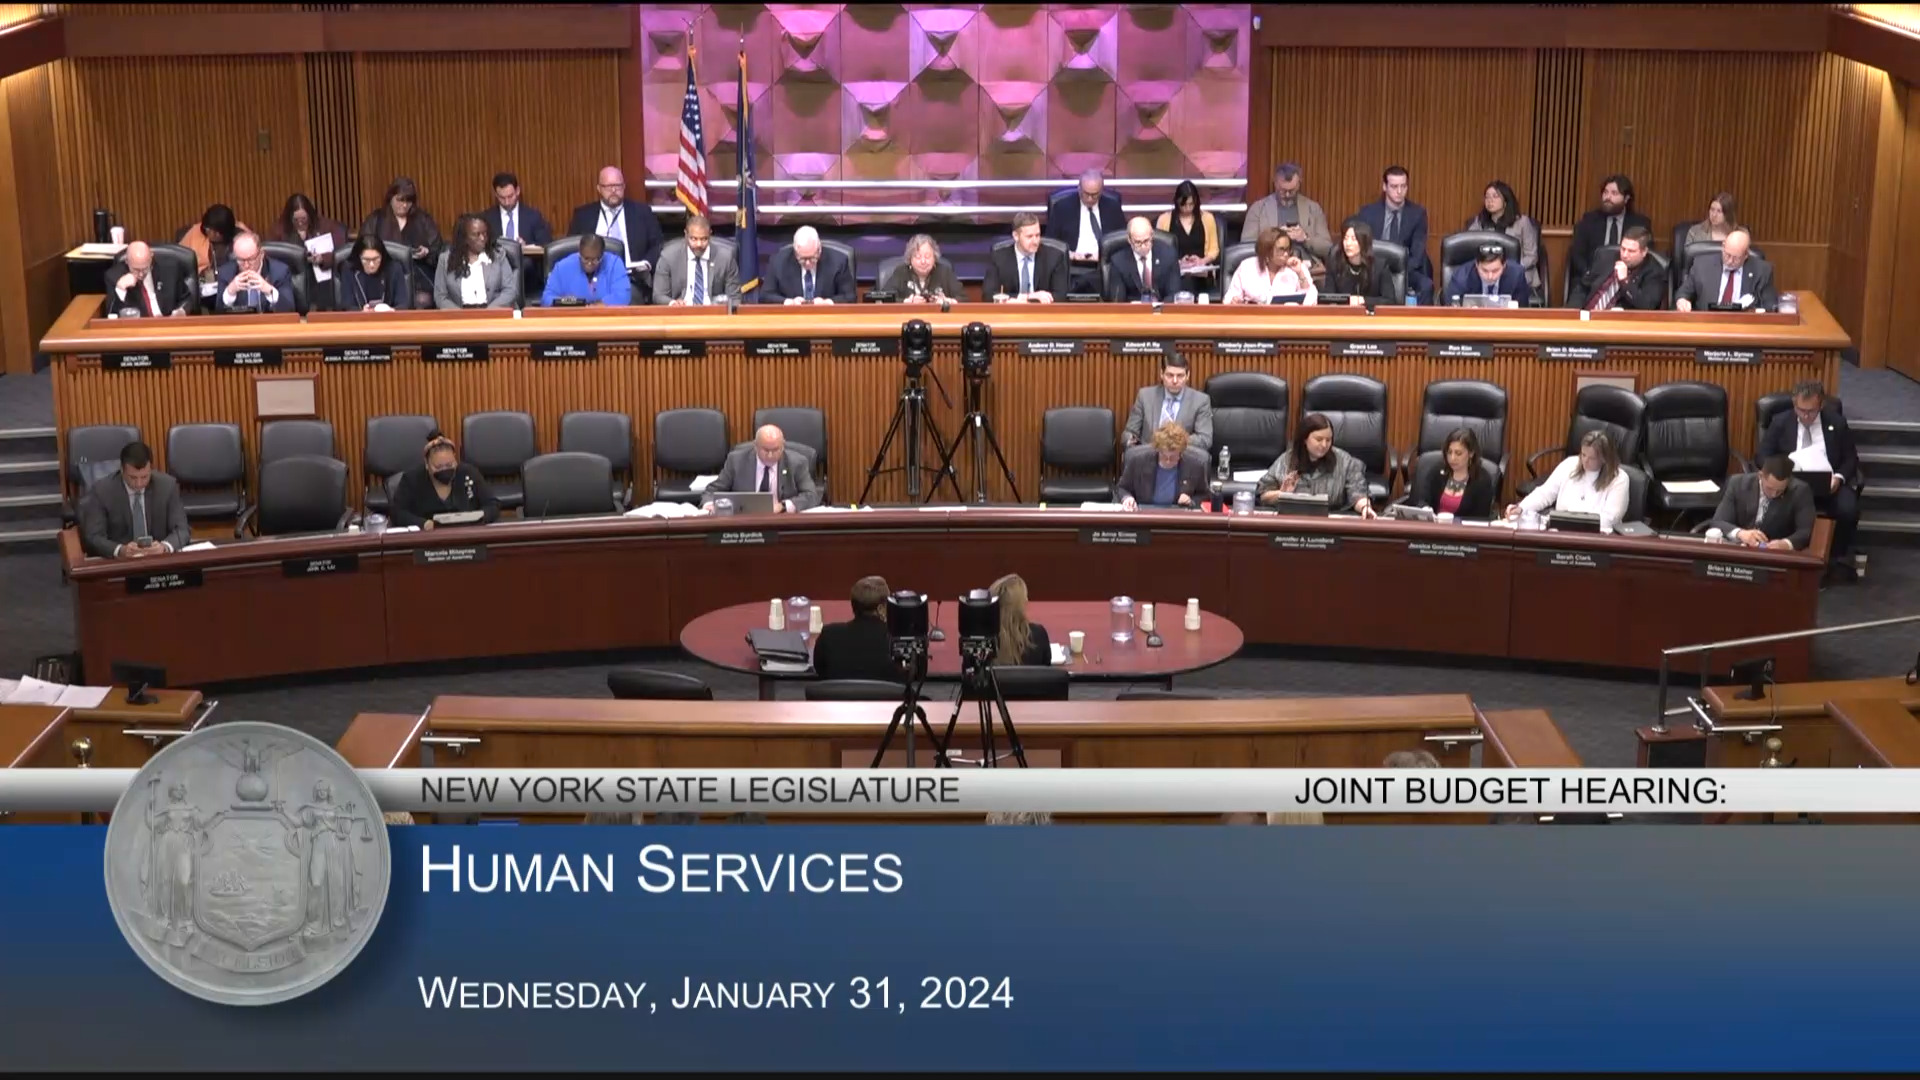 Children and Family Services Acting Commissioner Testifies During Budget Hearing on Human Services